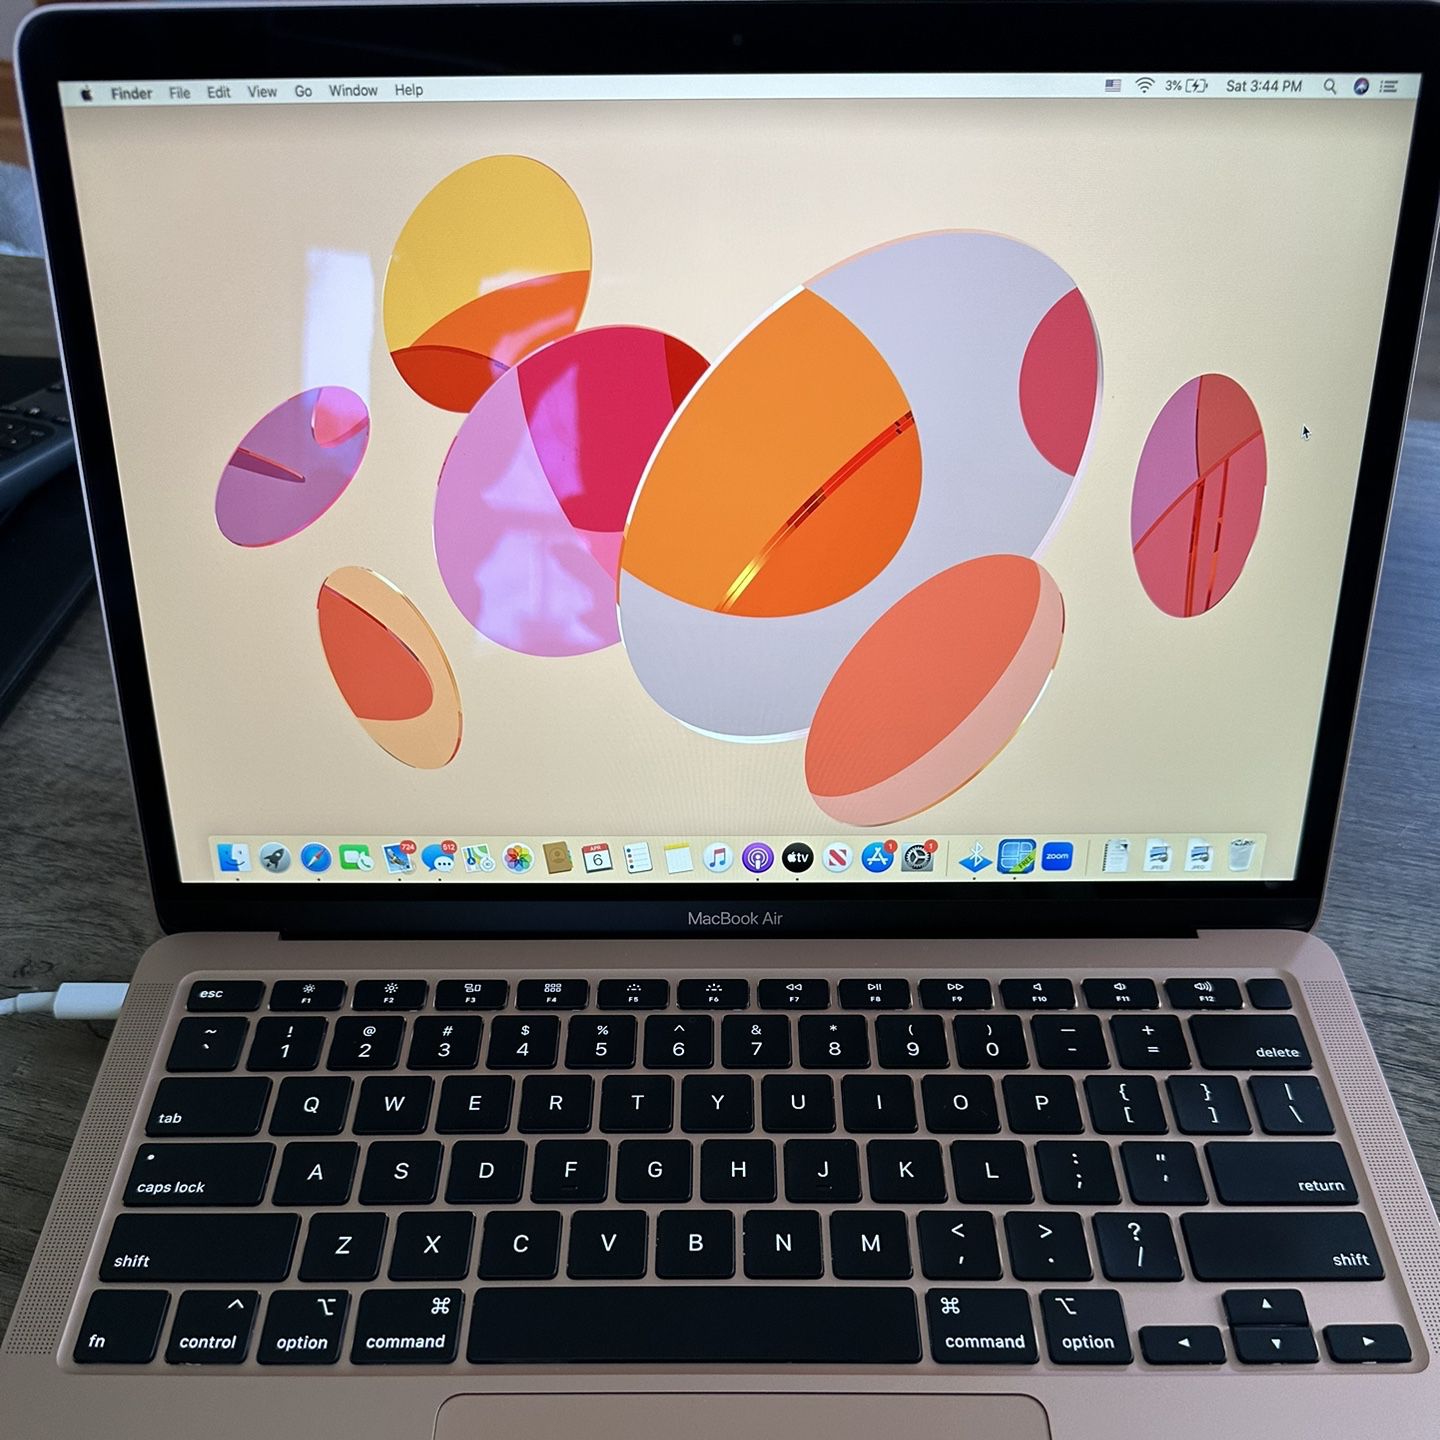 Apple - MacBook Air 13.3" Laptop with Touch ID - Intel Core i3 - 8GB Memory - 256GB Solid State Drive - Gold